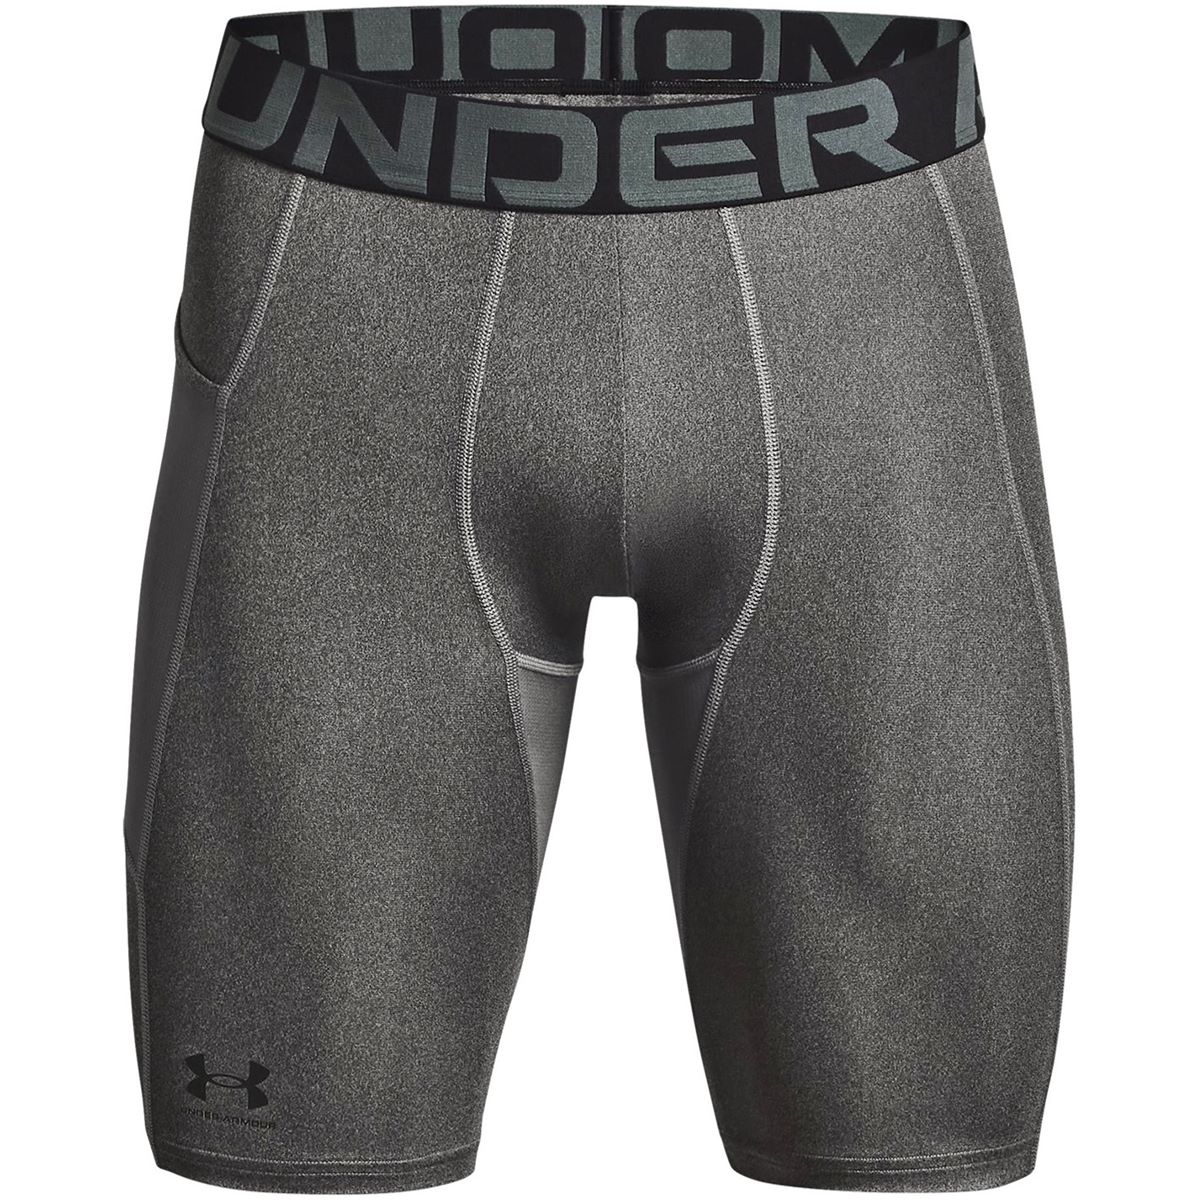 8 Amazing Under Armour Men’s Compression Shorts For 2023